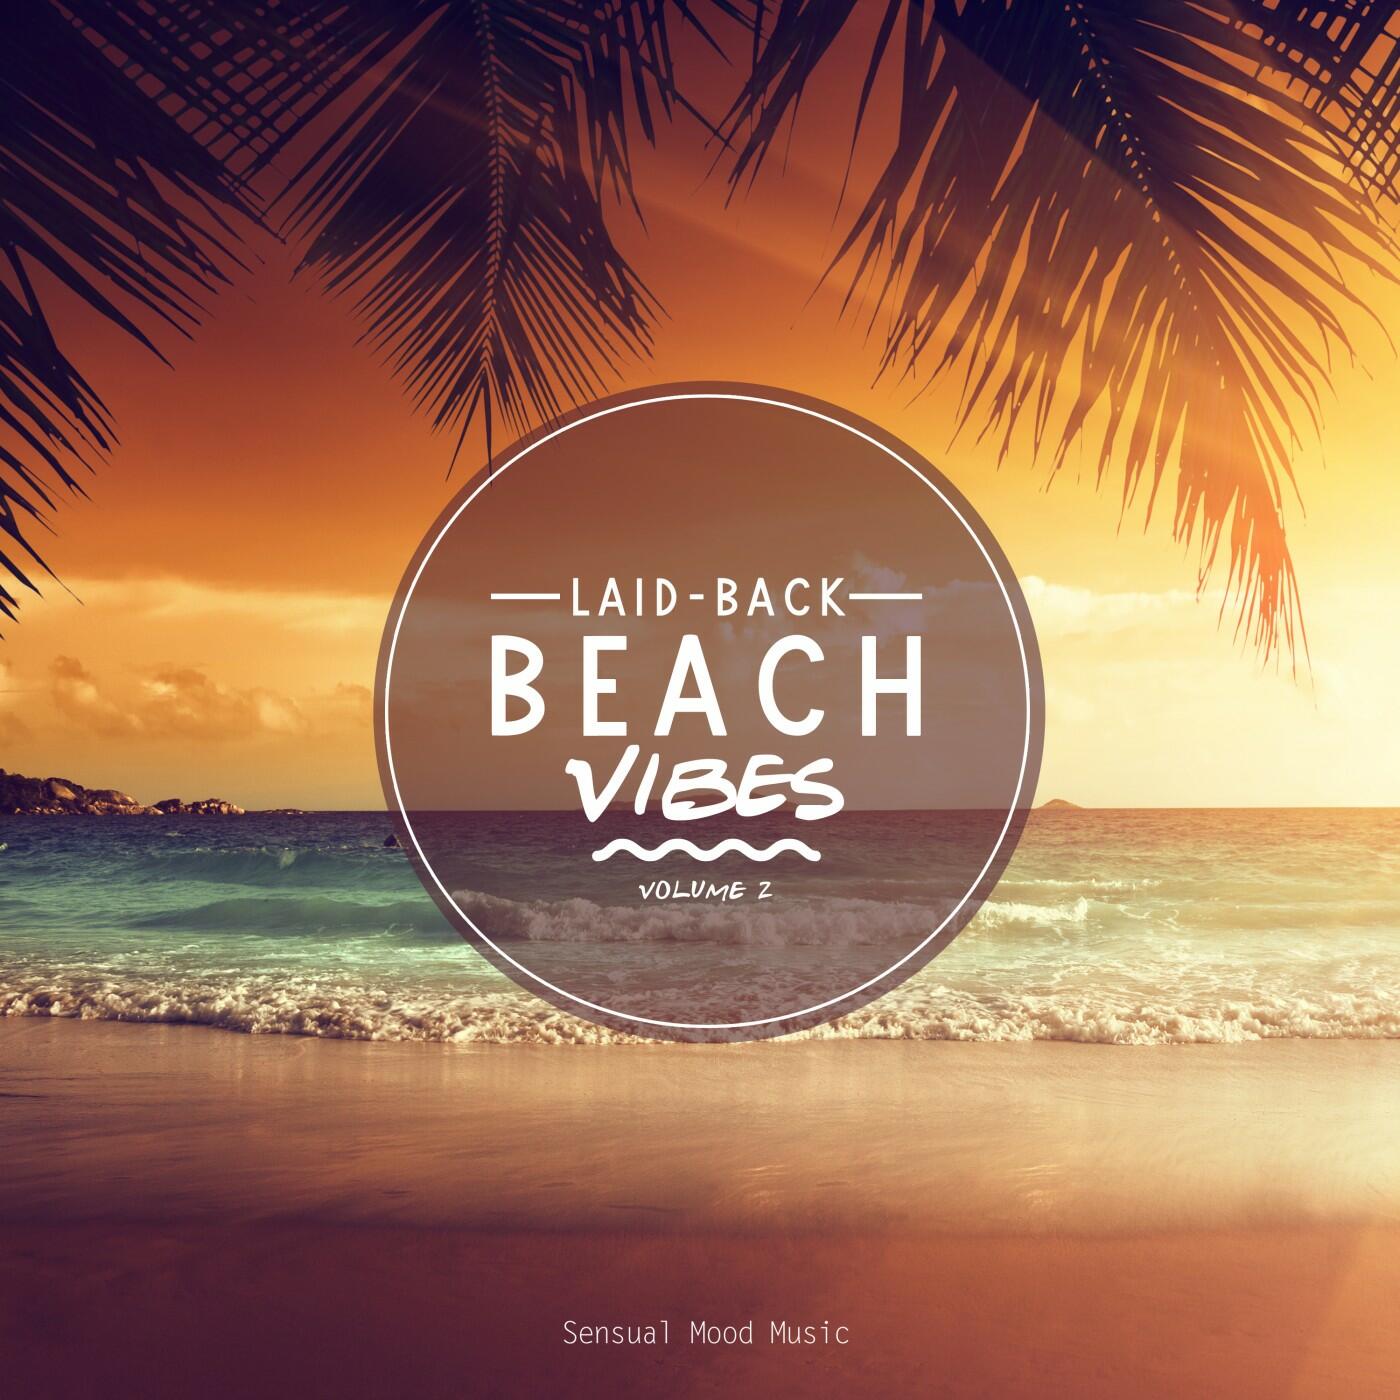 Listen Free to Various Artists - Laid-Back Beach Vibes, Vol. 2 Radio on